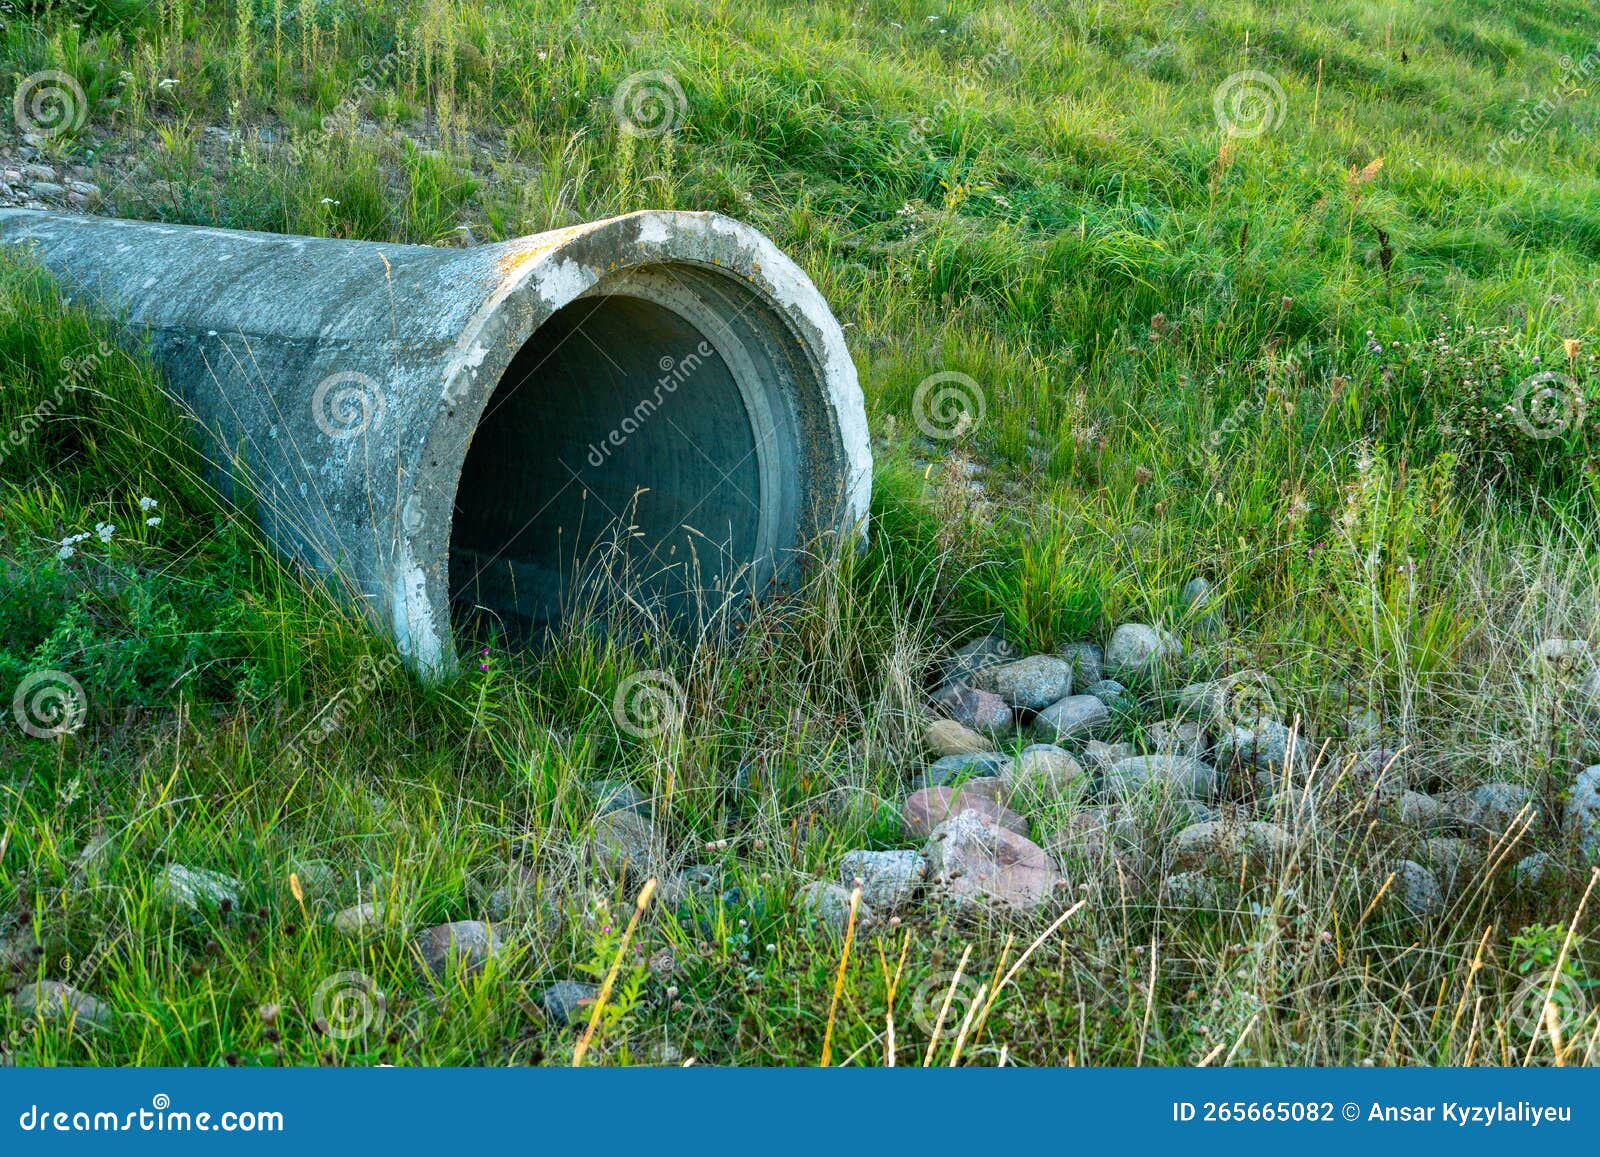 a large concrete pipe for diverting the river under the highway. leaky dirty water from large concrete pipes. dirty sewage from